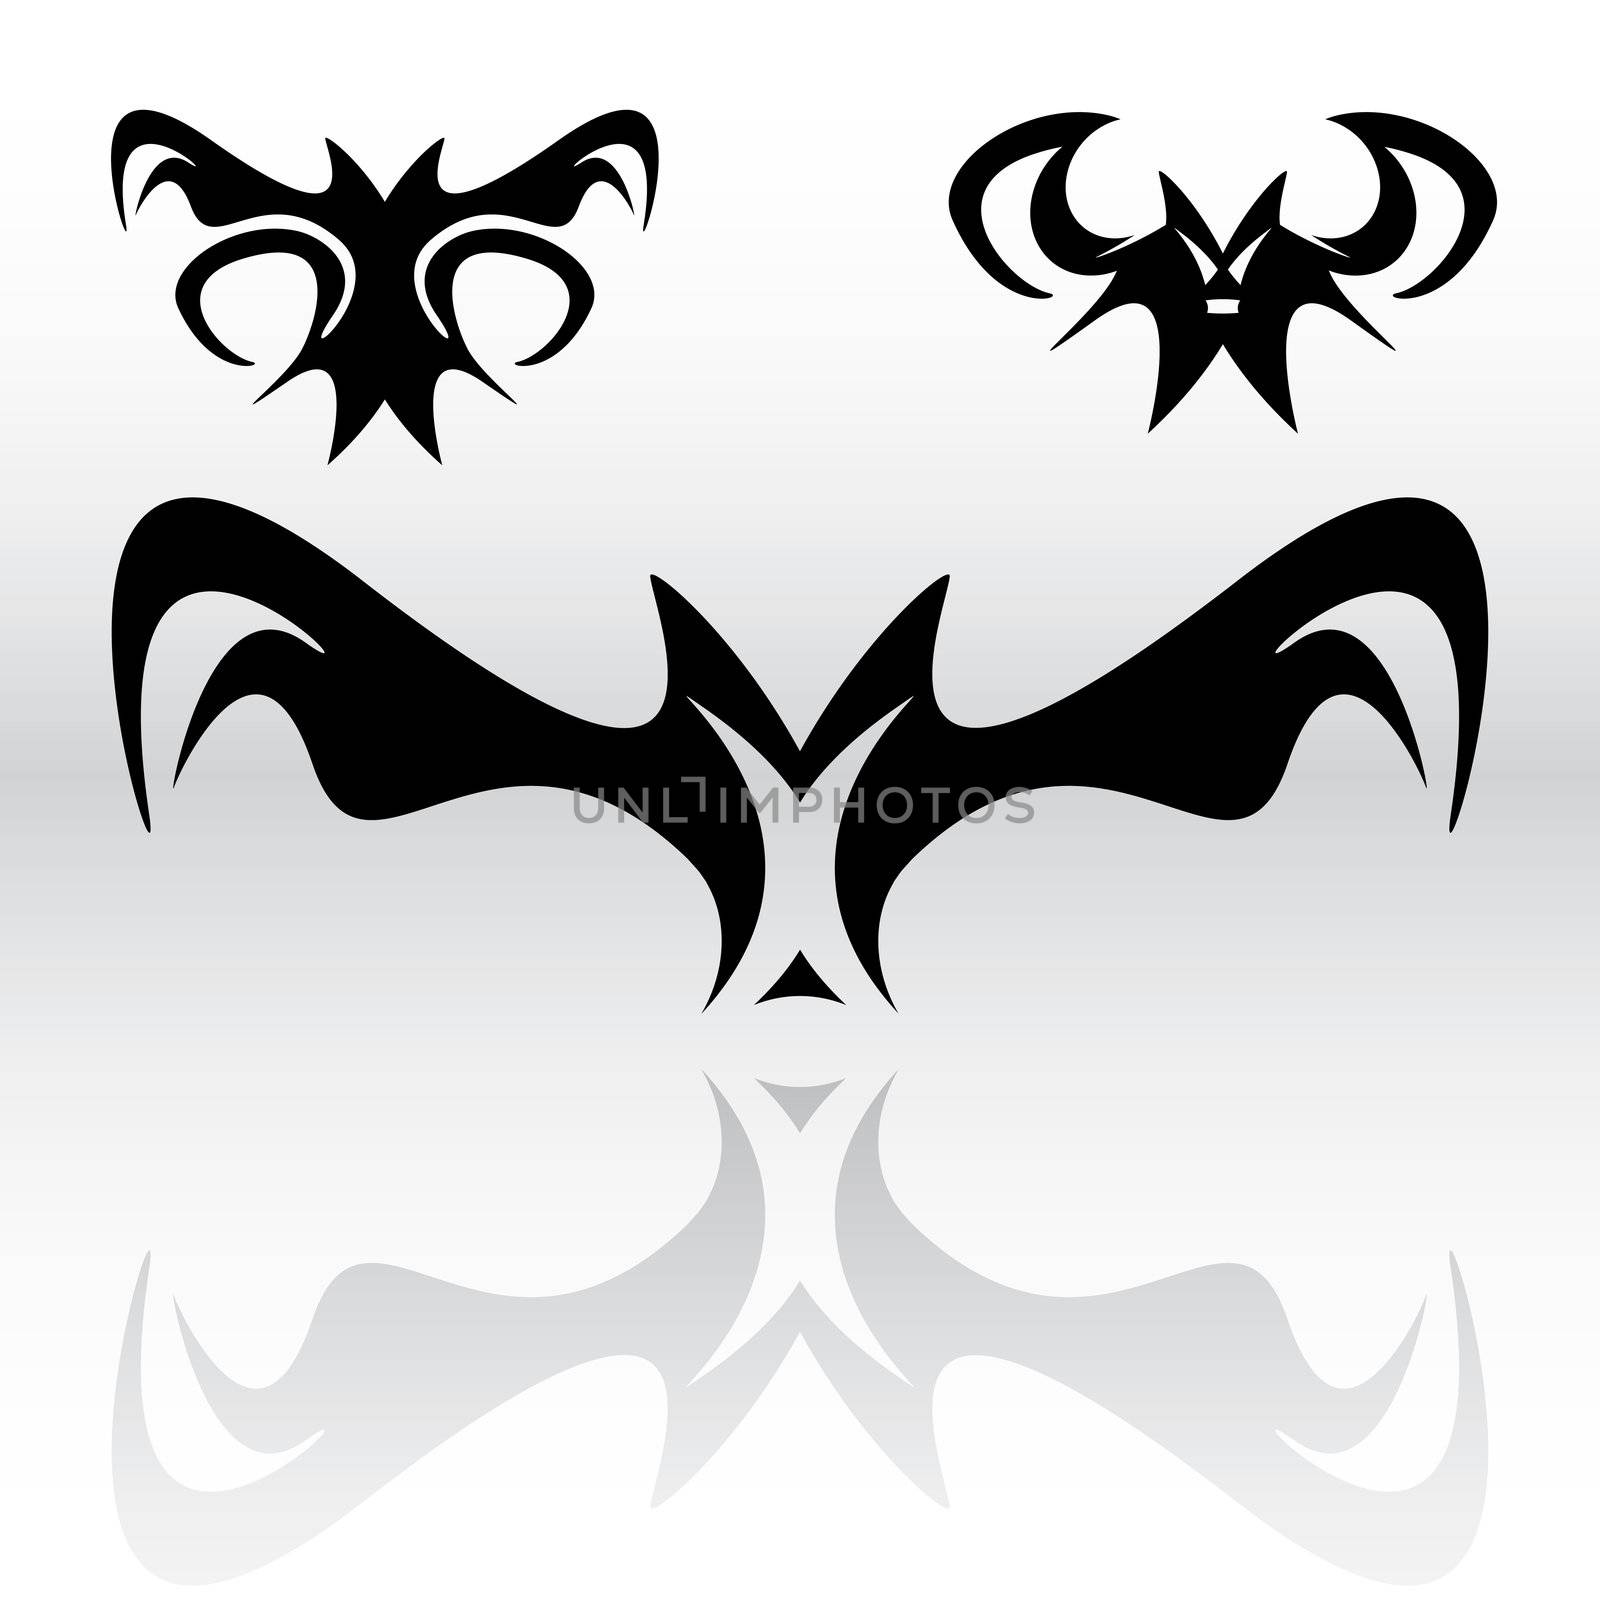 Three different original vampire bat cliparts in a tribal or gothic looking style for use as art elements or icons.